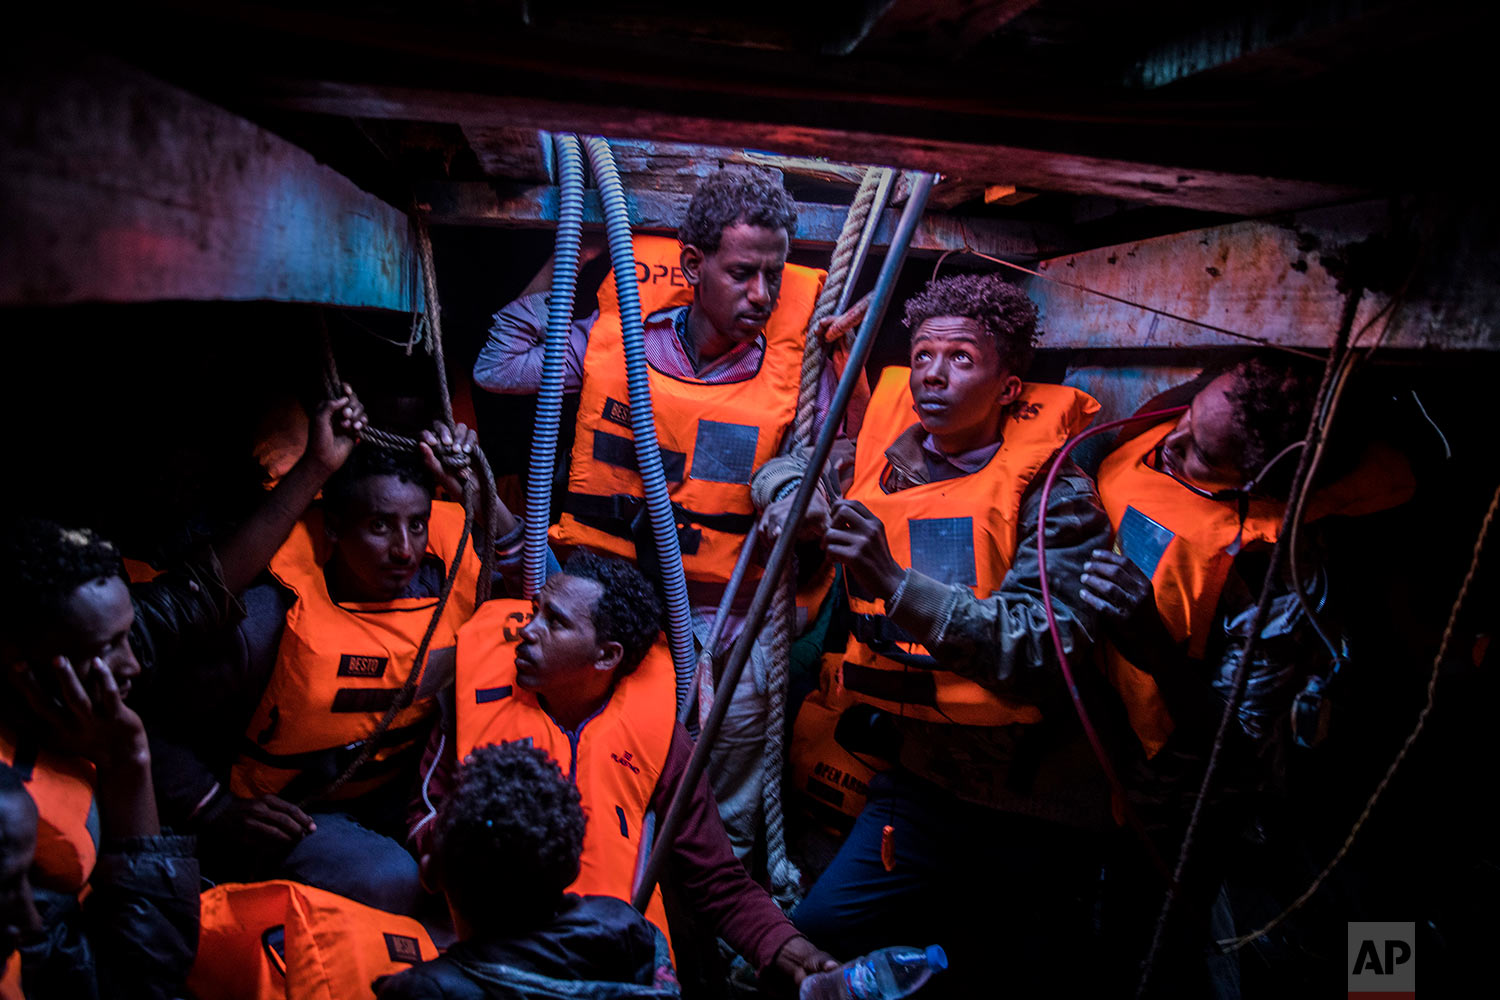  In this Tuesday, Jan. 16, 2018 photo Sub-Saharan refugees and migrants, mostly from Eritrea, wait to be rescued by aid workers of Spanish NGO Proactiva Open Arms, in the lower deck of a wooden as they were trying to leave the Libyan coast and reach European soil, 34 miles north of Kasr-El-Karabulli, Libya. (AP Photo/Santi Palacios)&nbsp; |&nbsp; See these photos on AP Images  